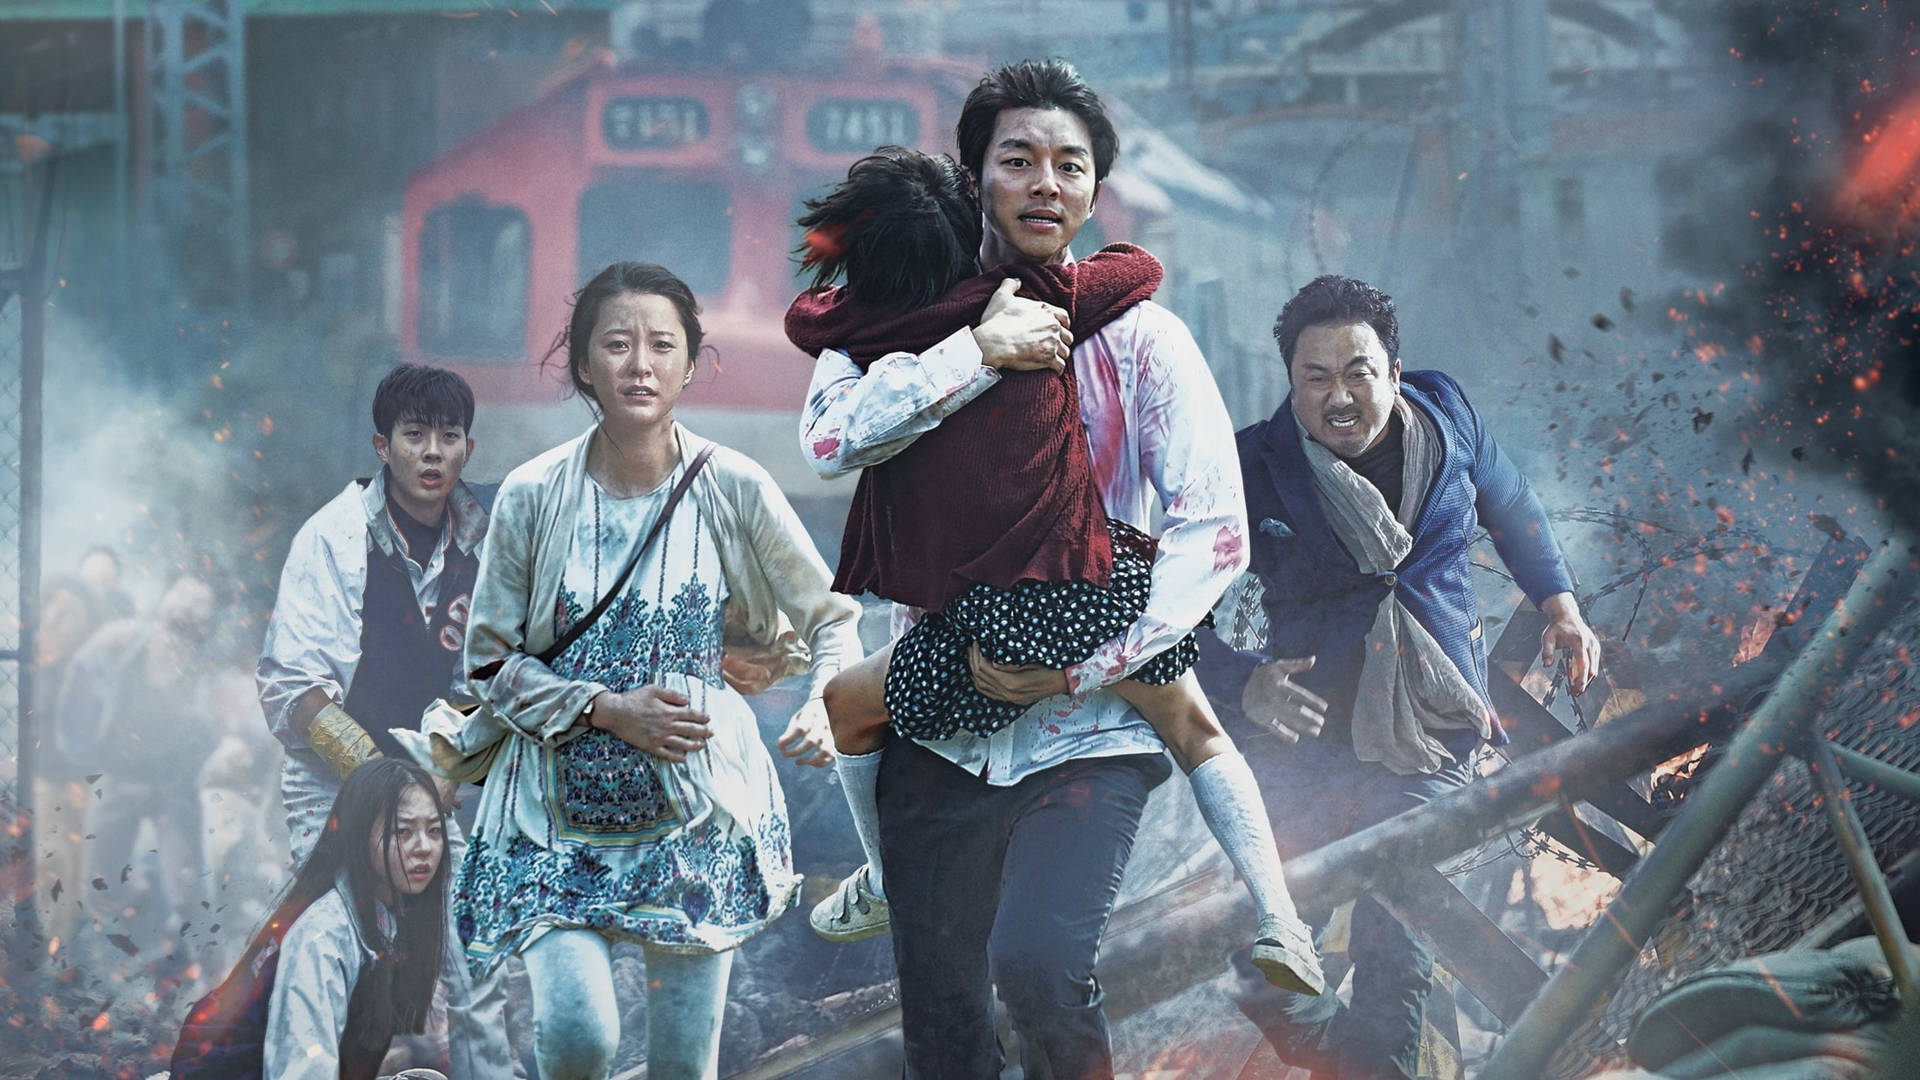 The iconic movie scene from Train to Busan, featuring a thrilling zombie chase. Wallpaper